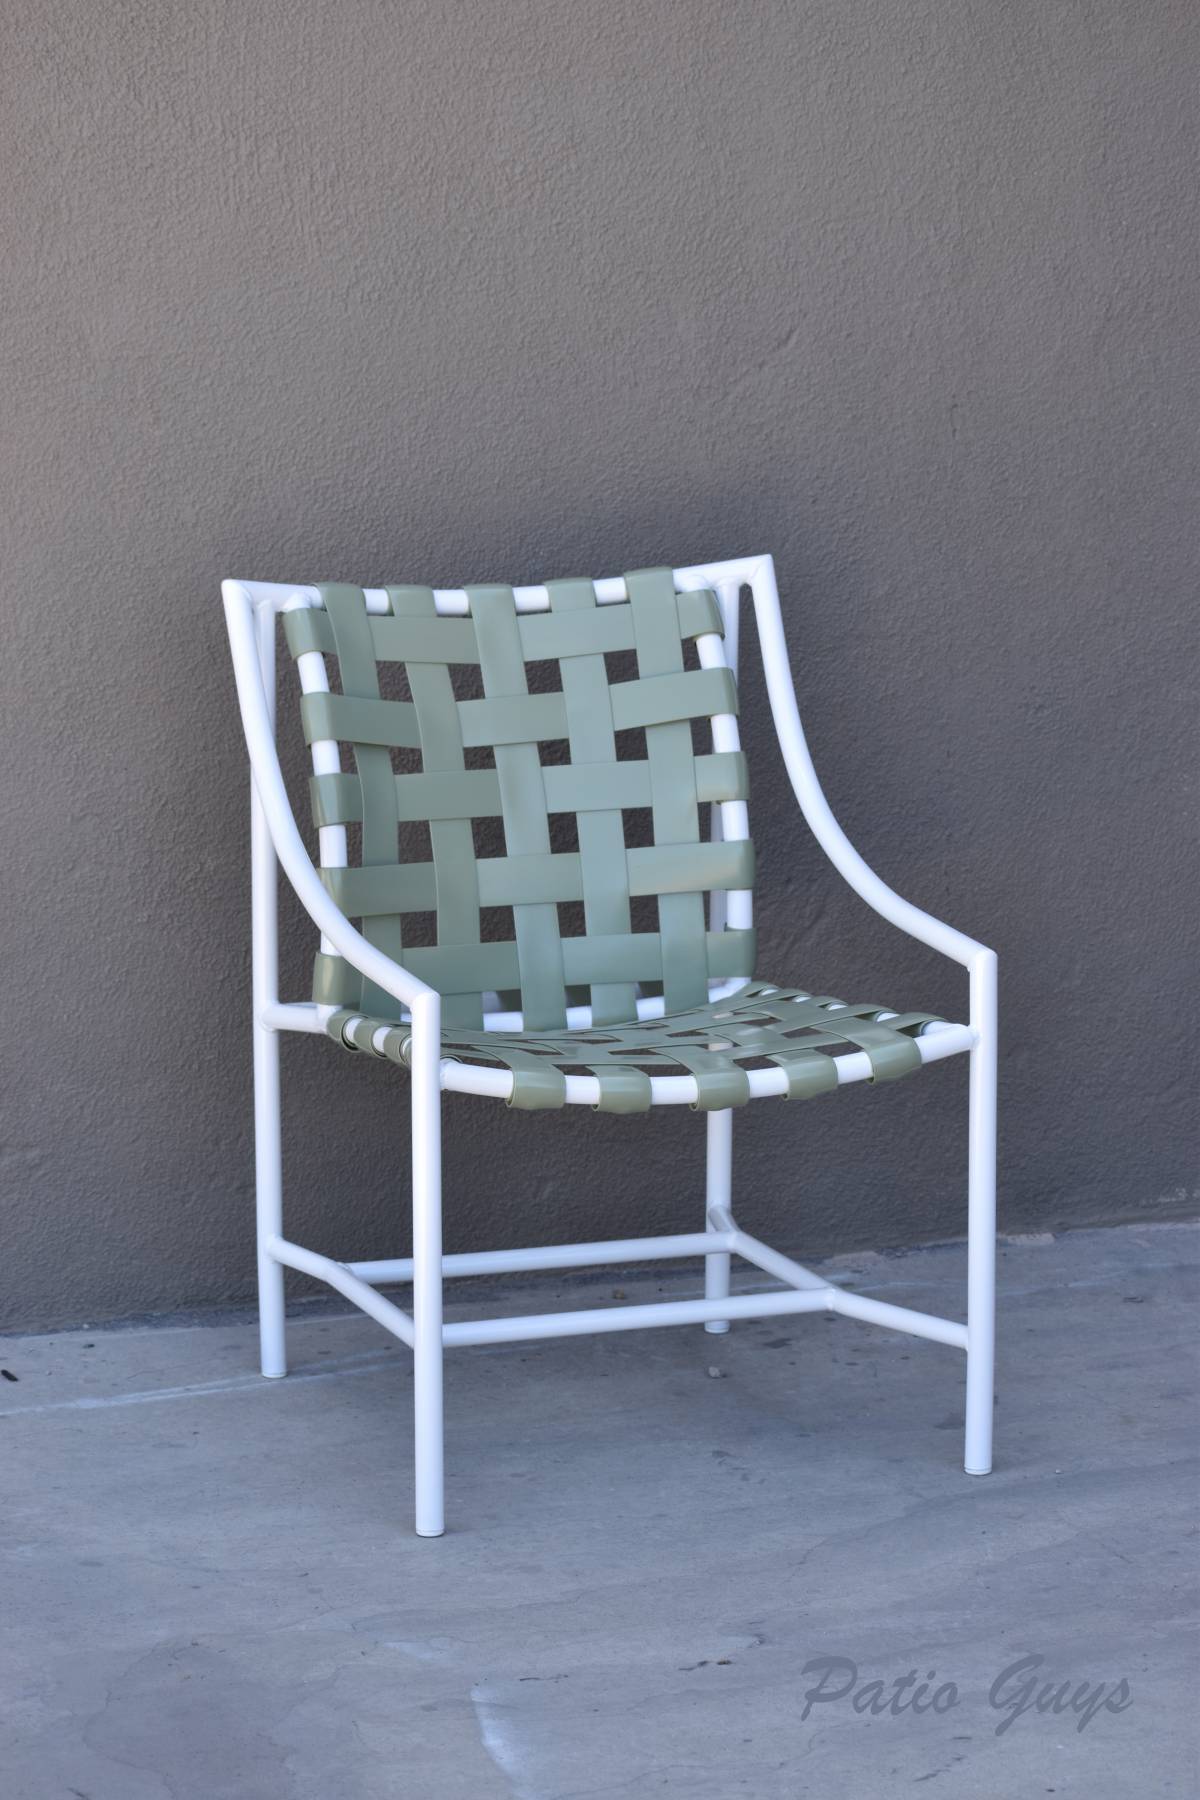 White and light green outdoor strap chair